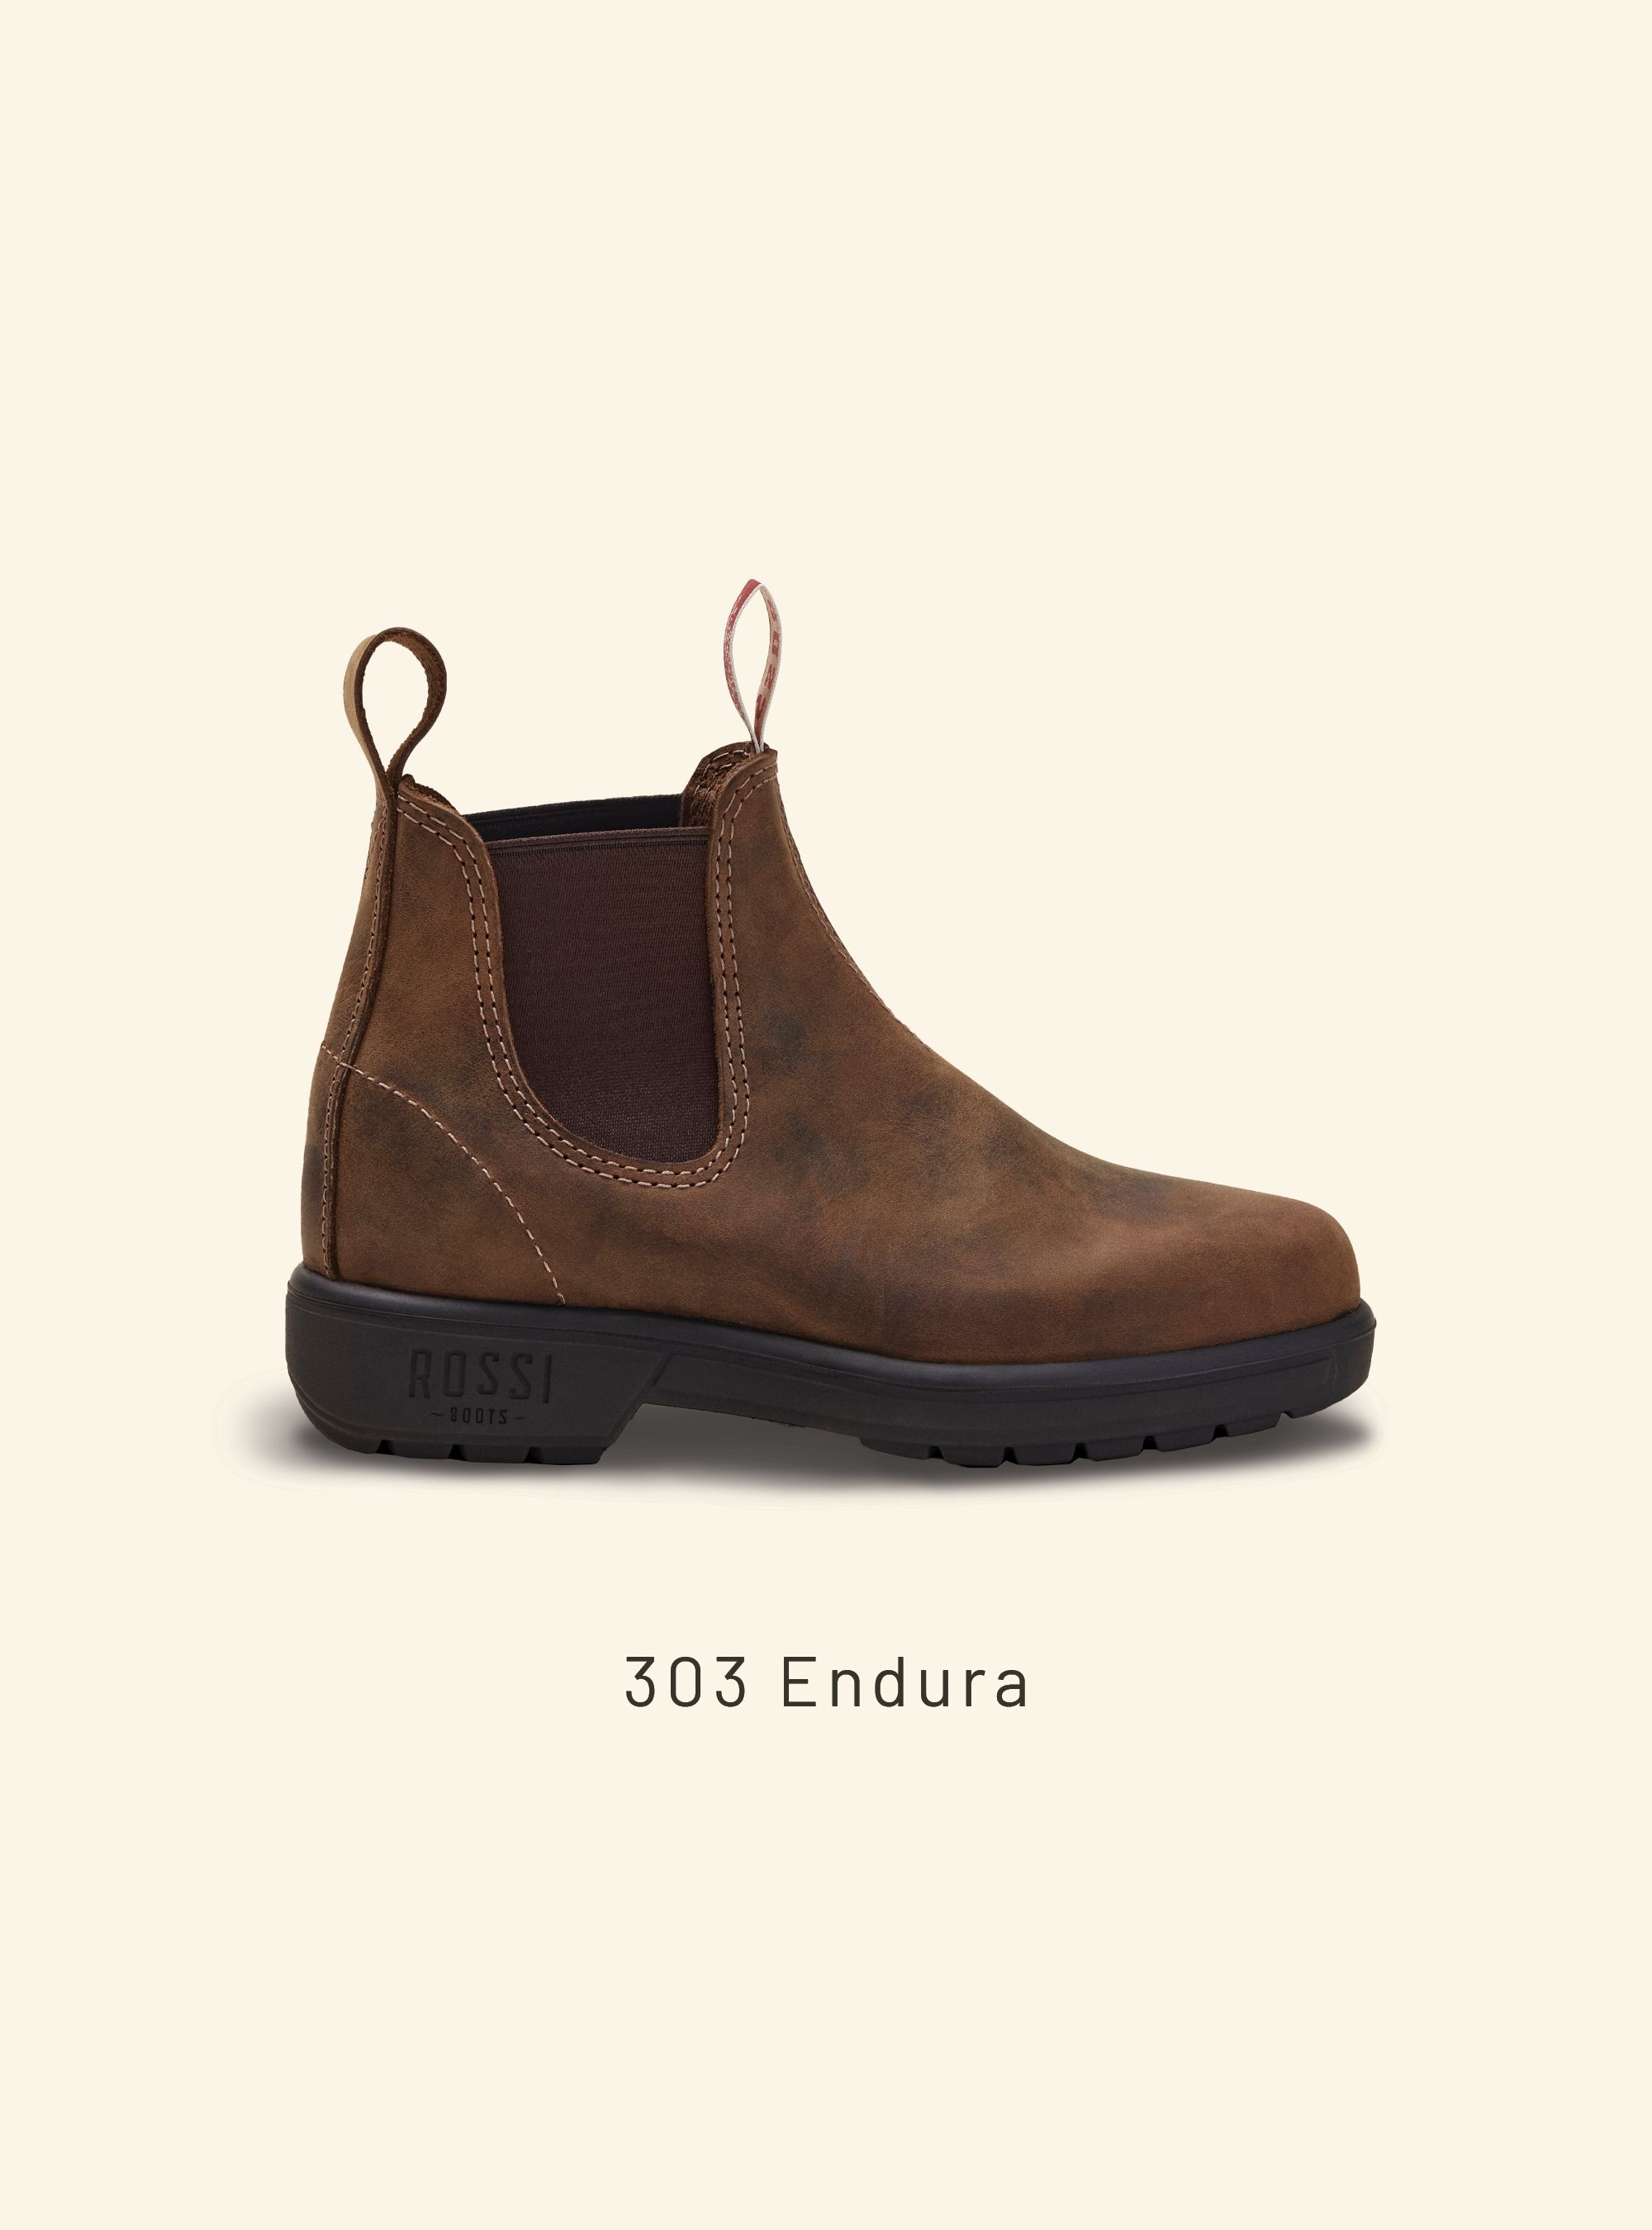 Leather Boots - Est.1910 | Rossi Boots